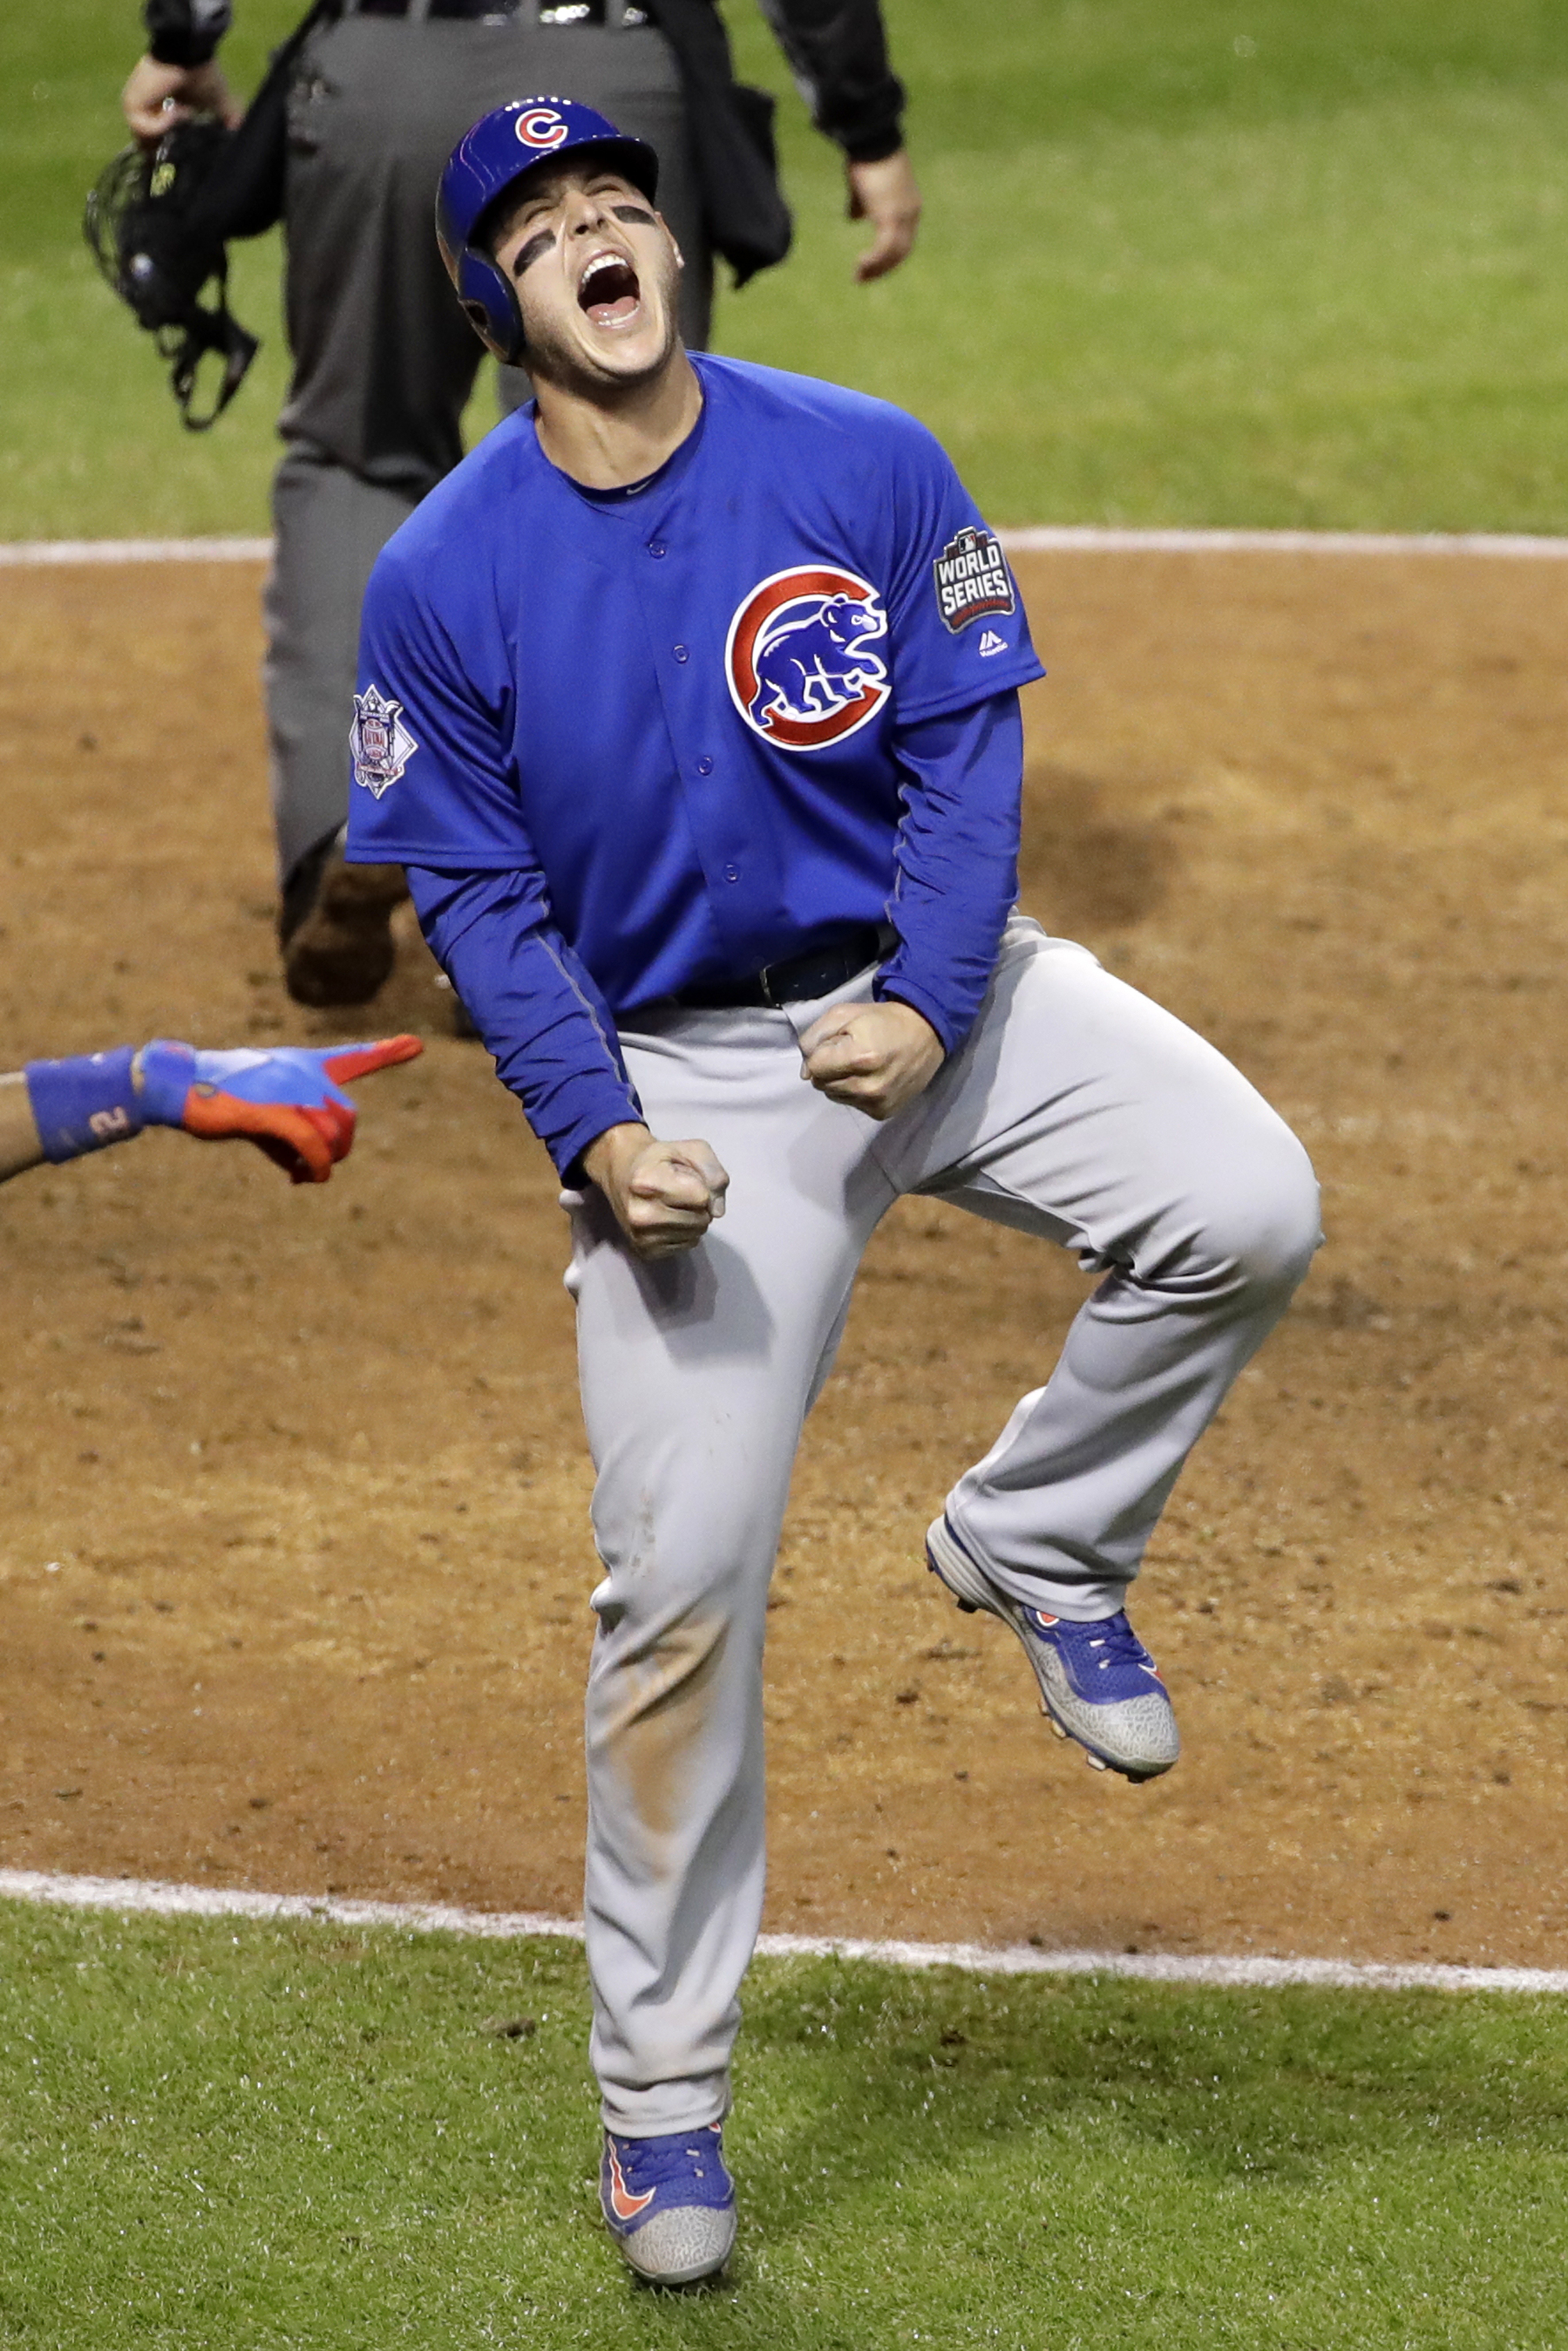 Chicago Cubs' Anthony Rizzo reacts after scoring on a hit by Miguel Montero during the 10th inning of Game 7 of the Major League Baseball World Series against the Cleveland Indians Wednesday, Nov. 2, 2016, in Cleveland. (Gene J. Puskar–AP)